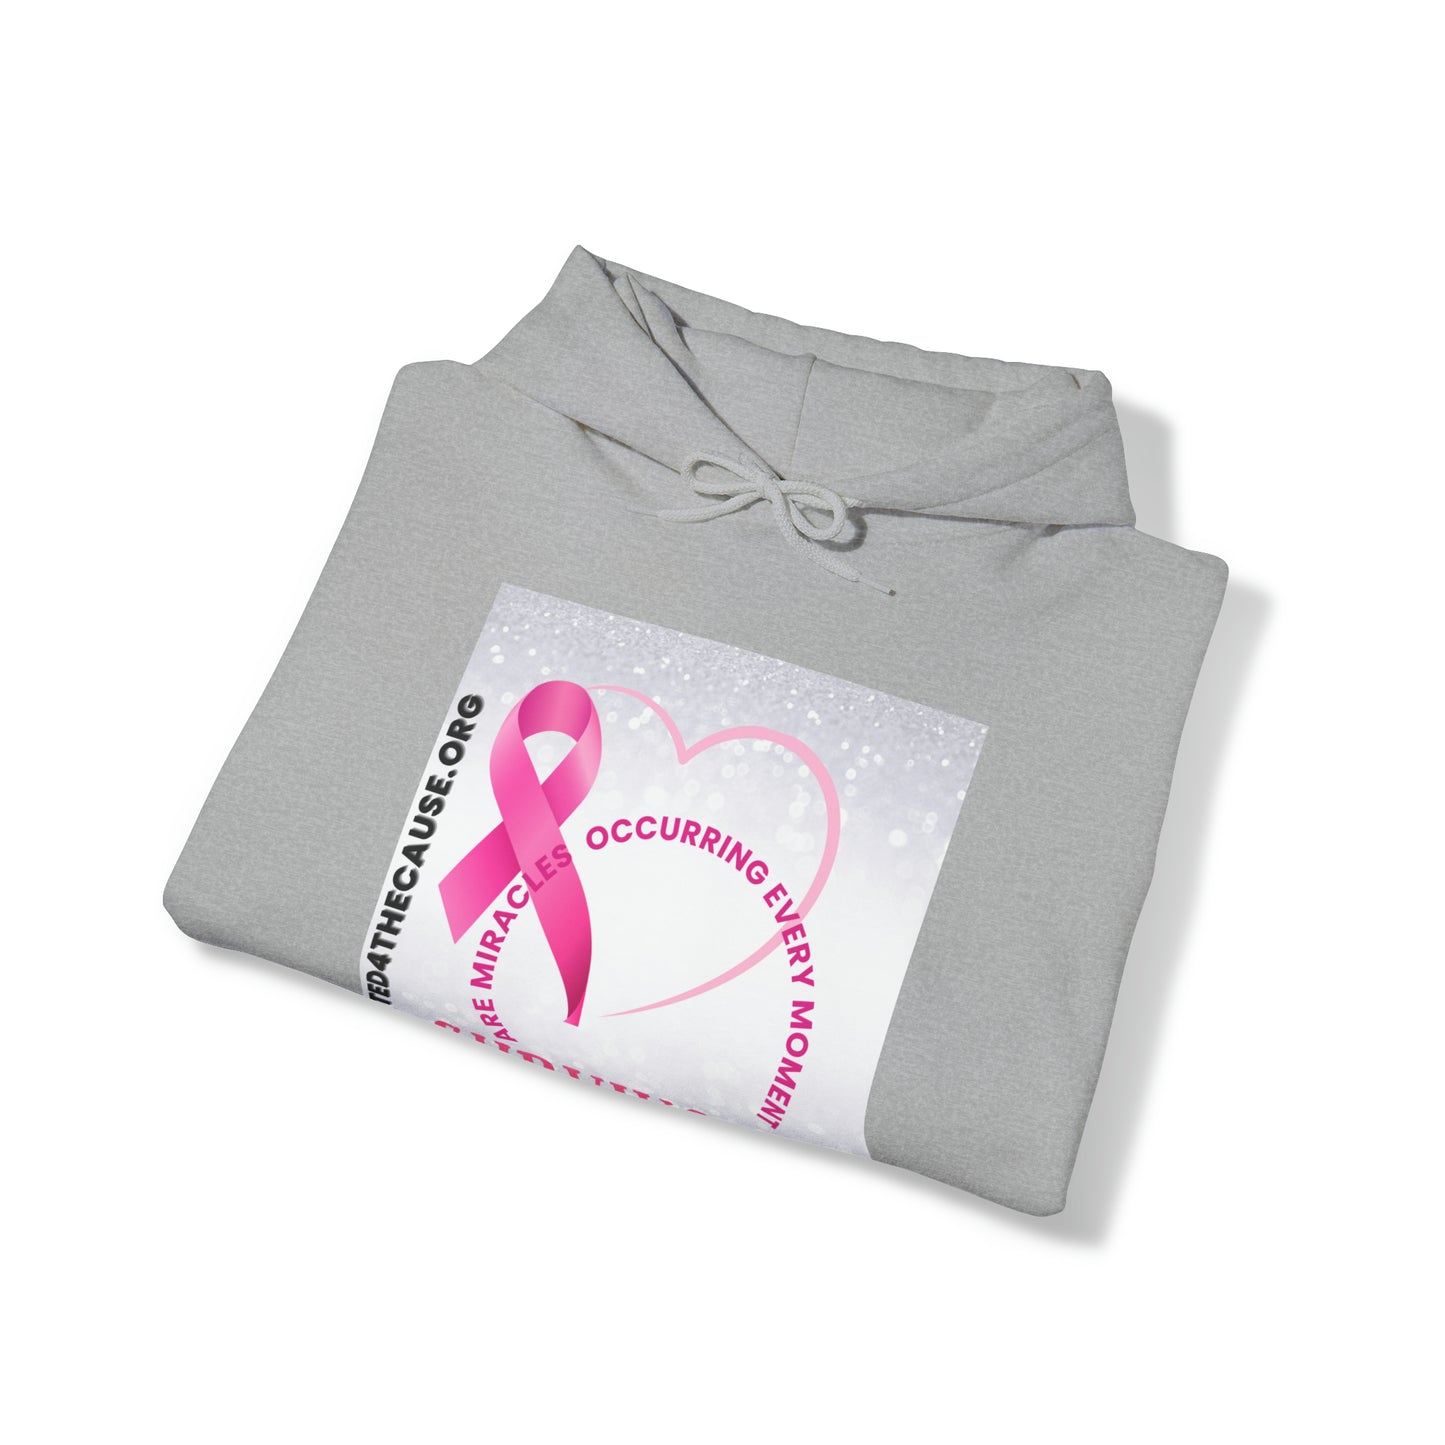 Survivors are miracles occurring every moment Unisex Heavy Blend™ Hooded Sweatshirt